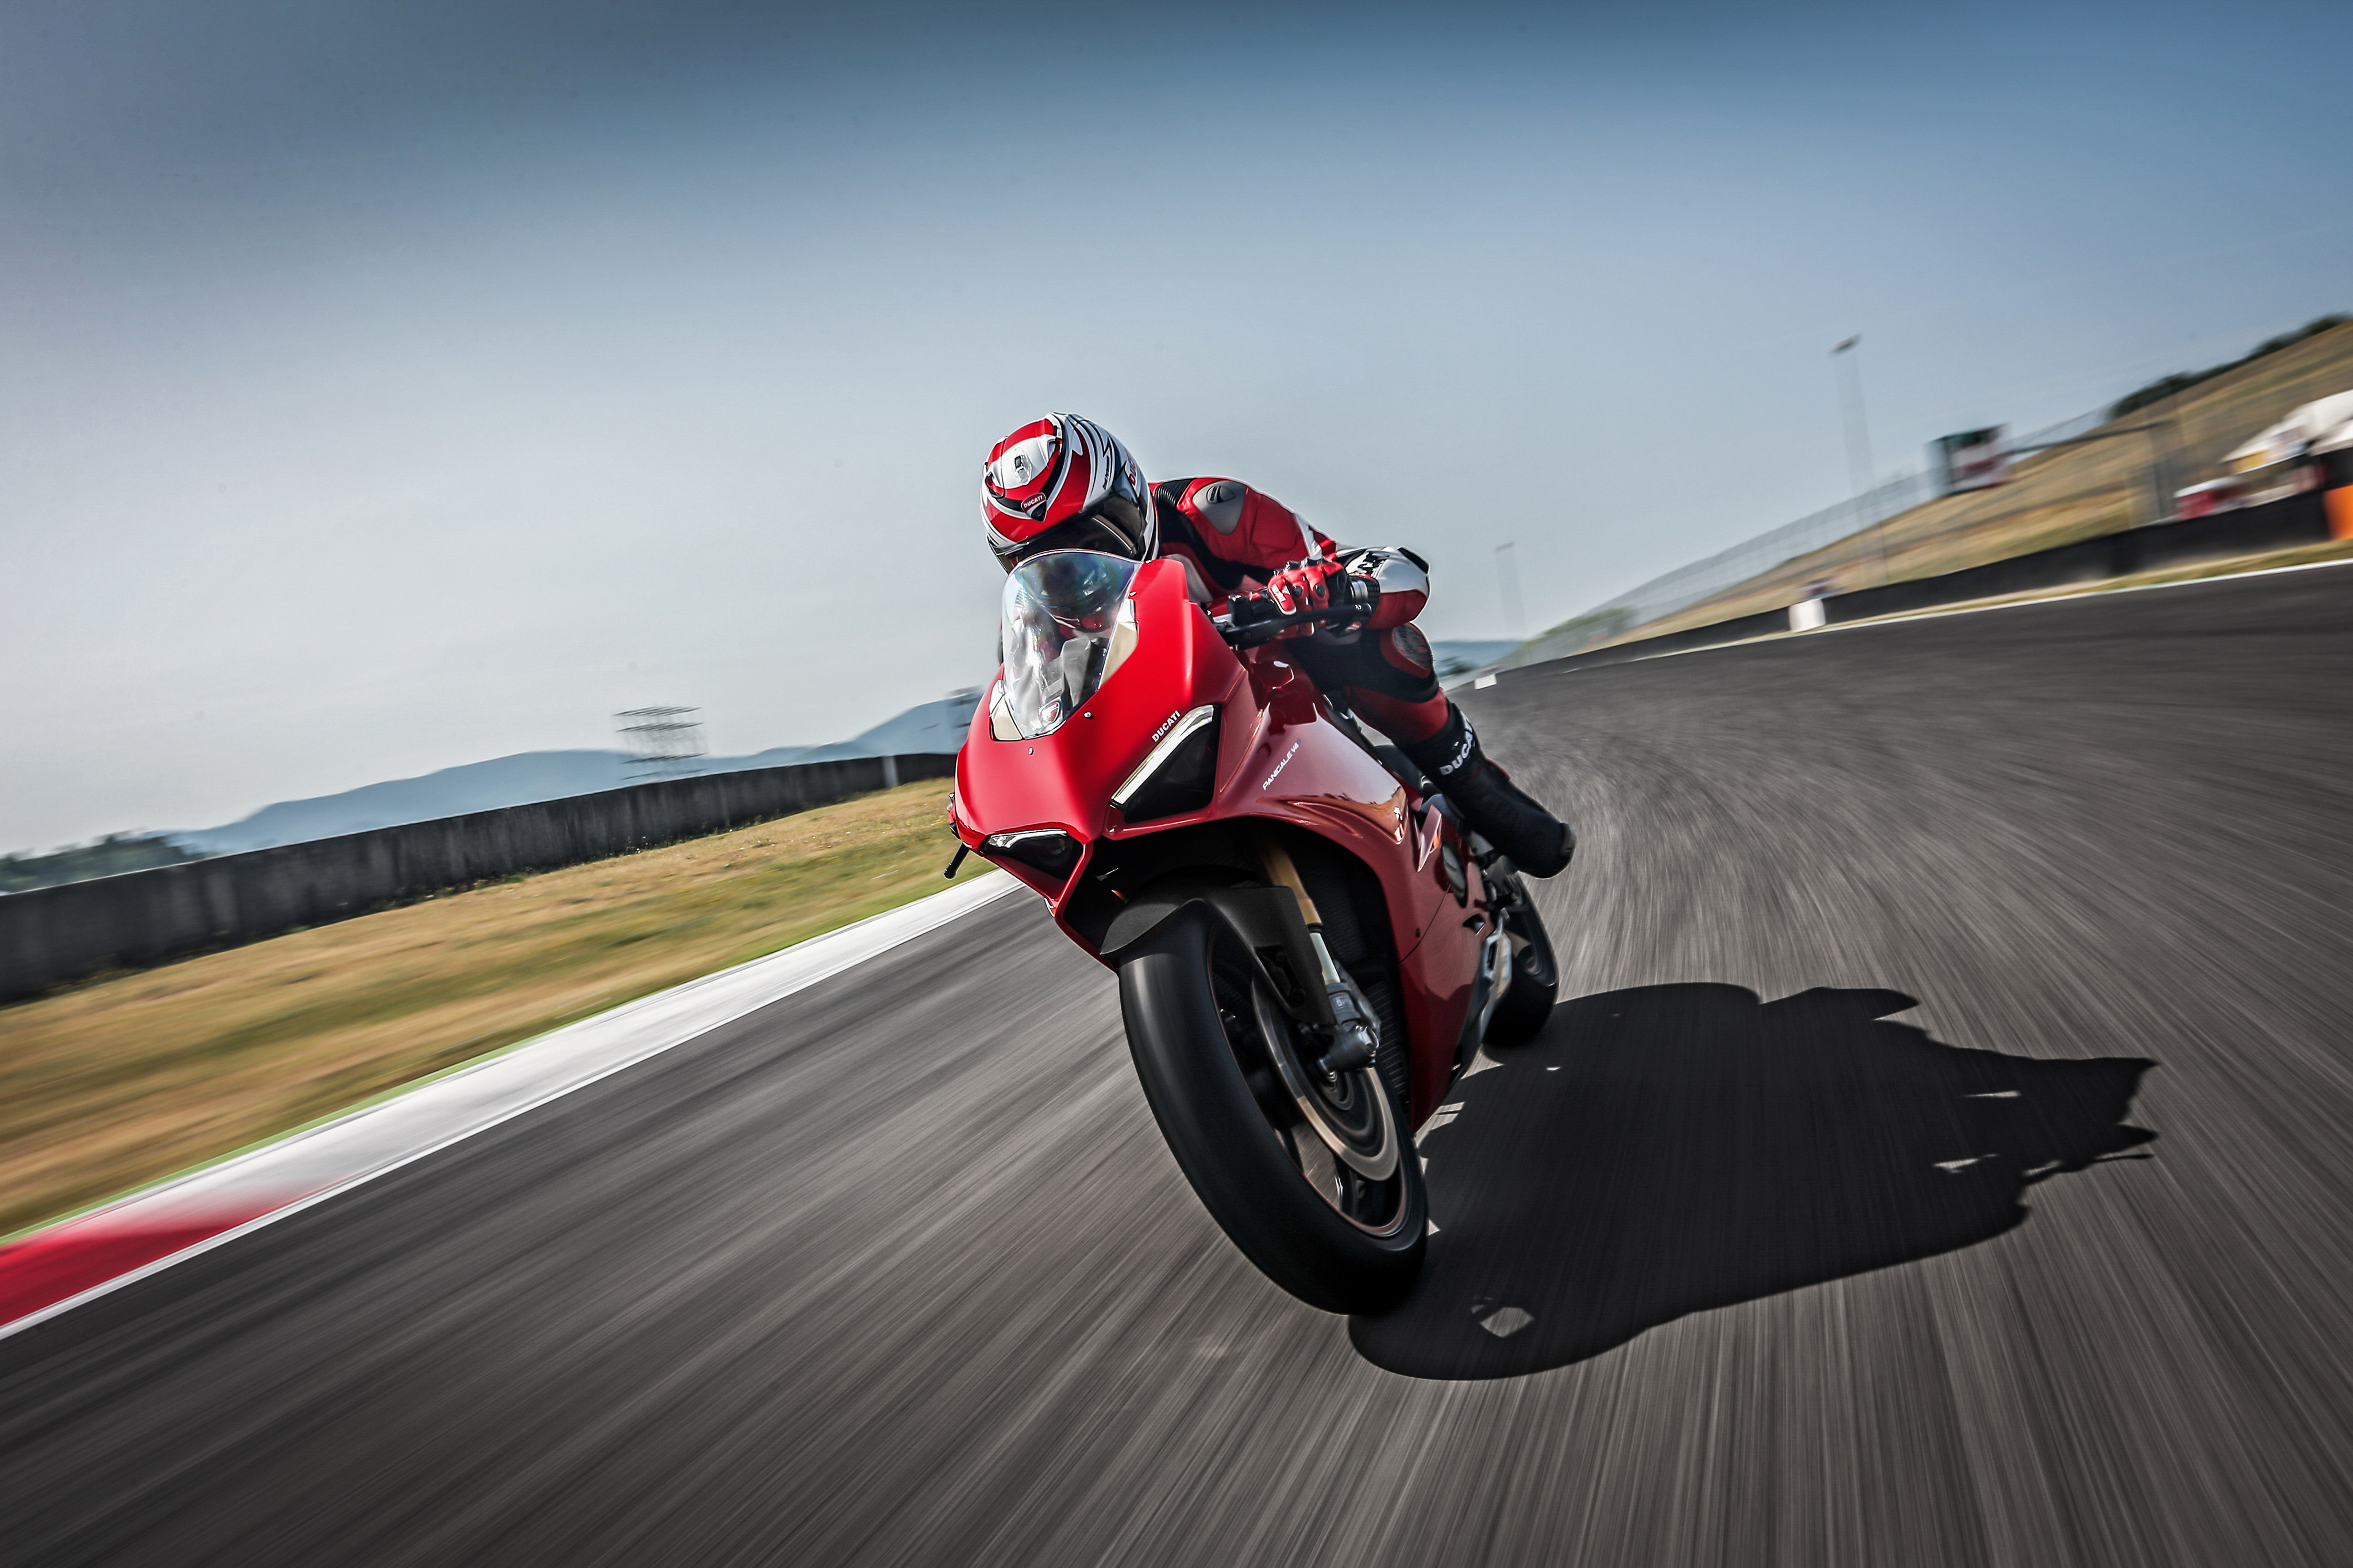 Ducati Panigale V4 S 2018 Racing, HD Bikes, 4k Wallpapers, Images ...